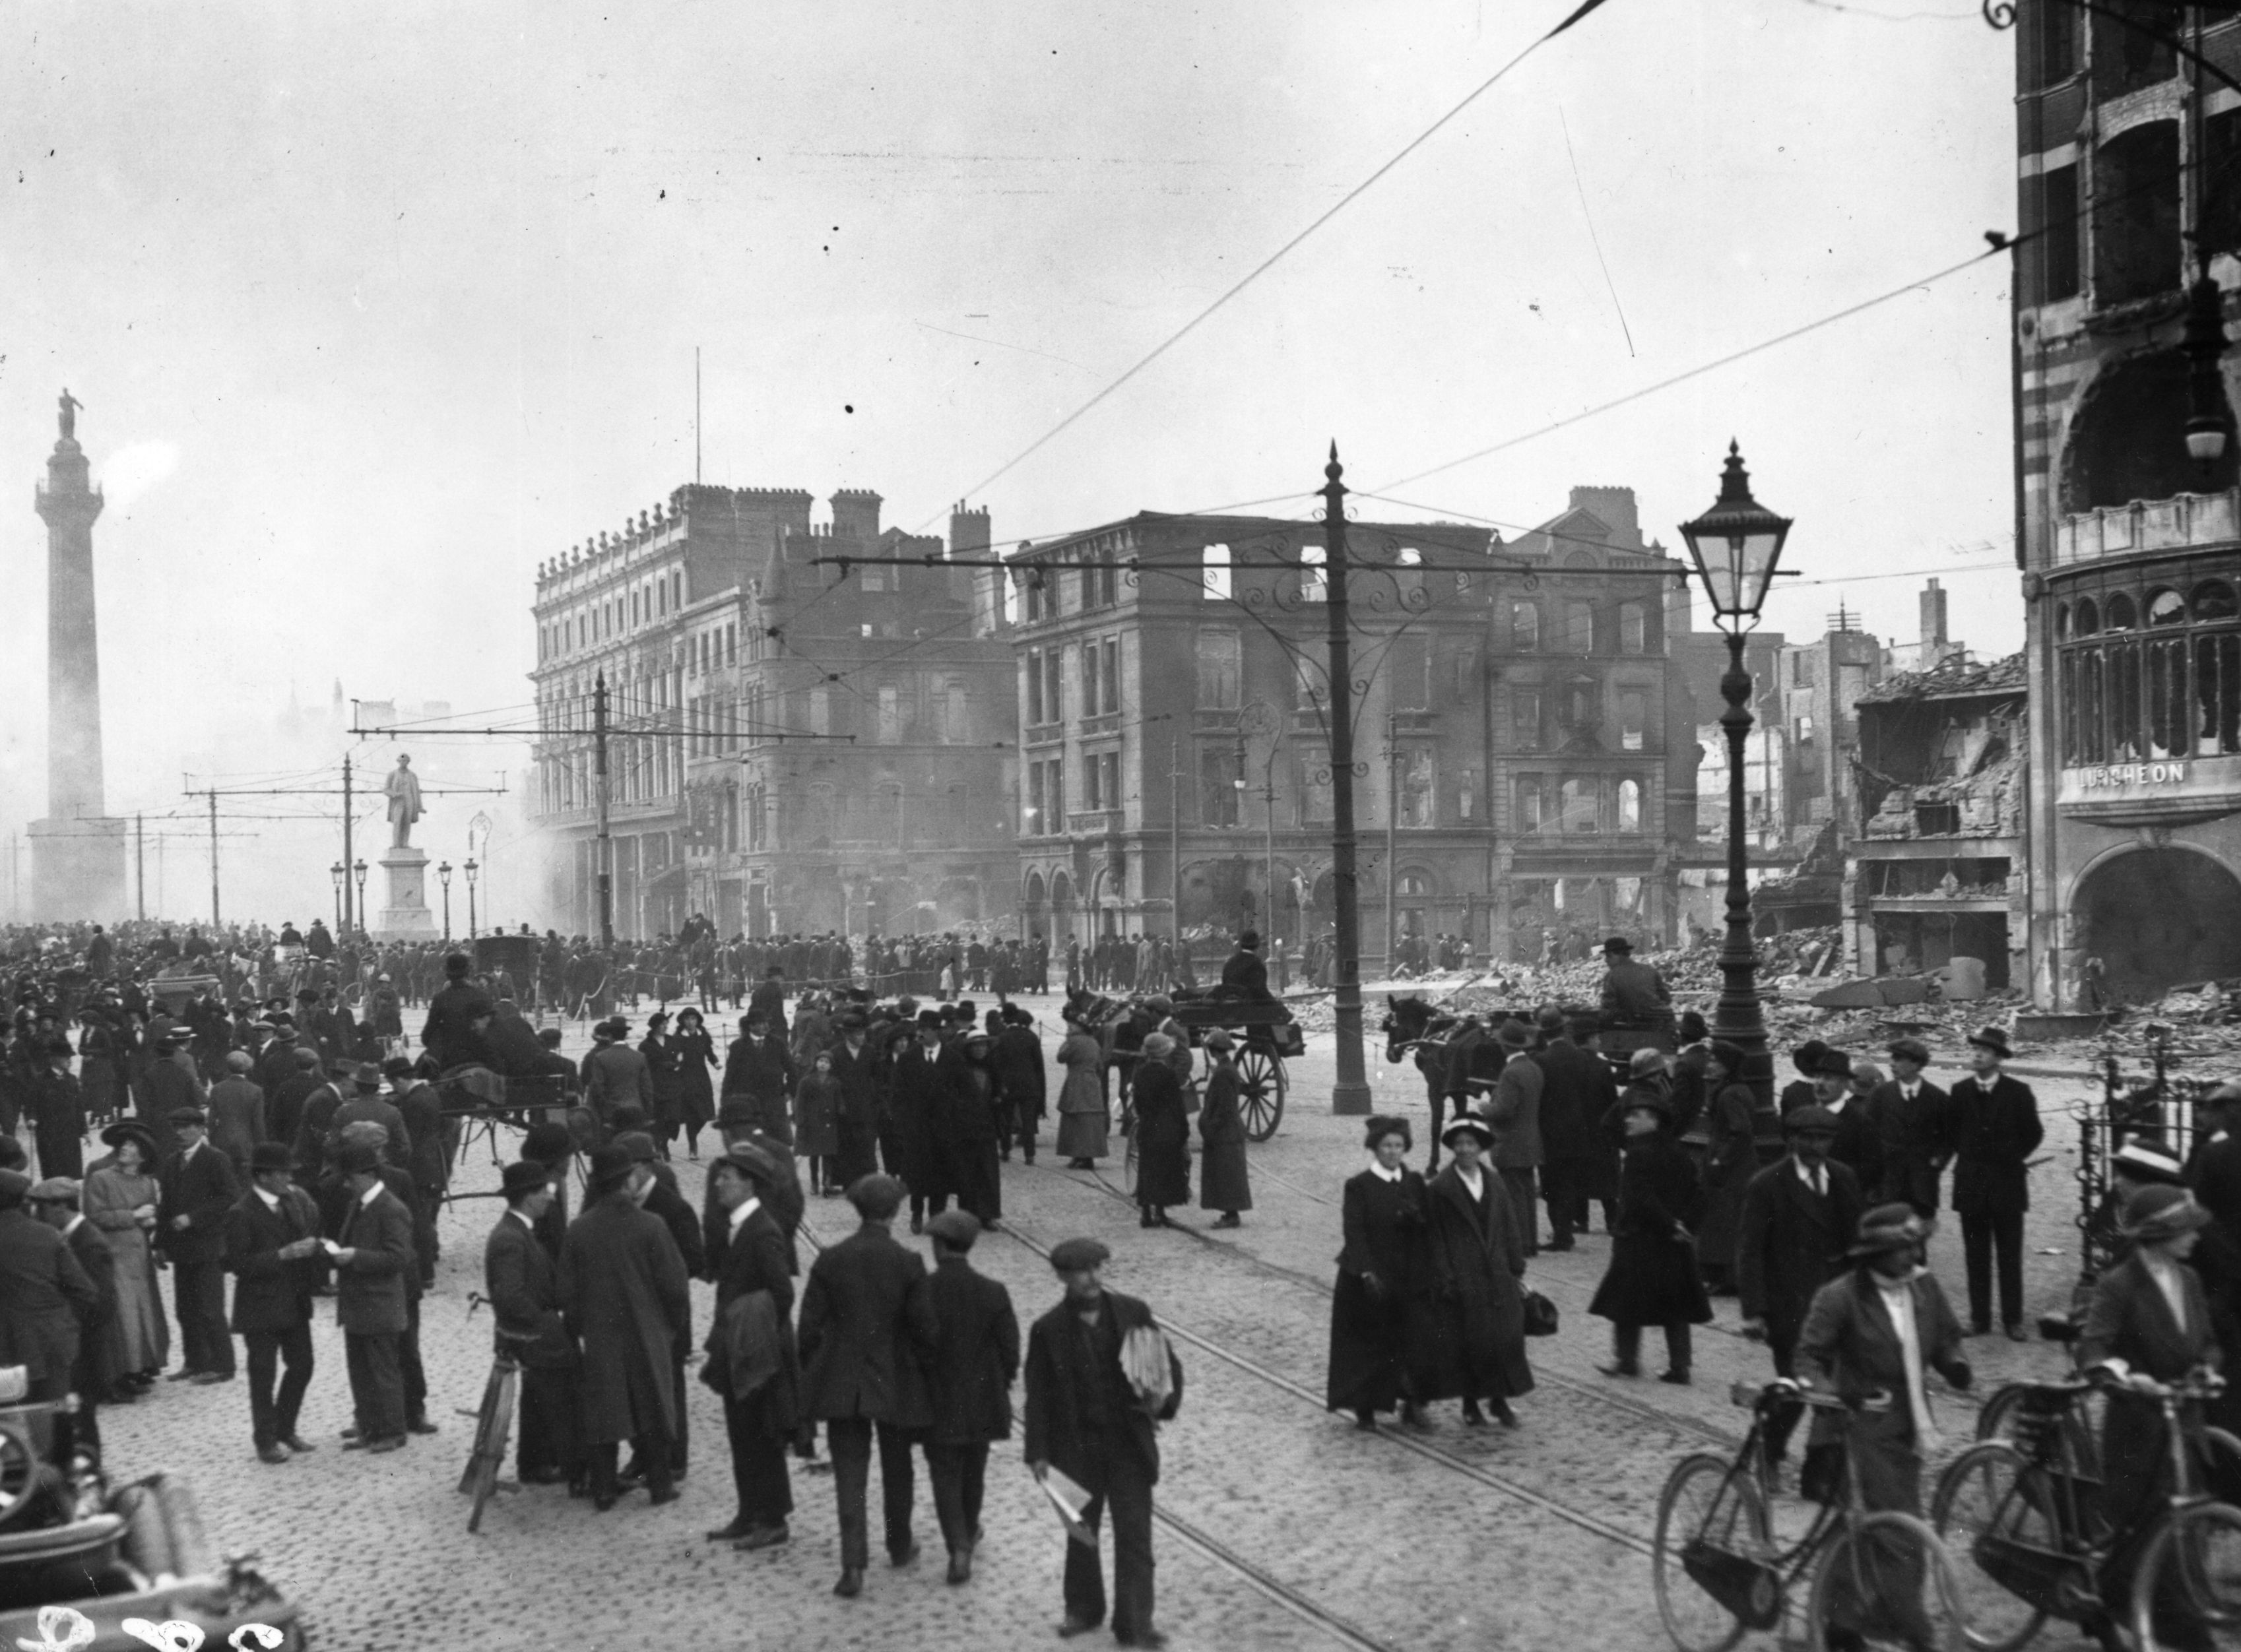 Bomb damage in Dublin following the Easter Rising